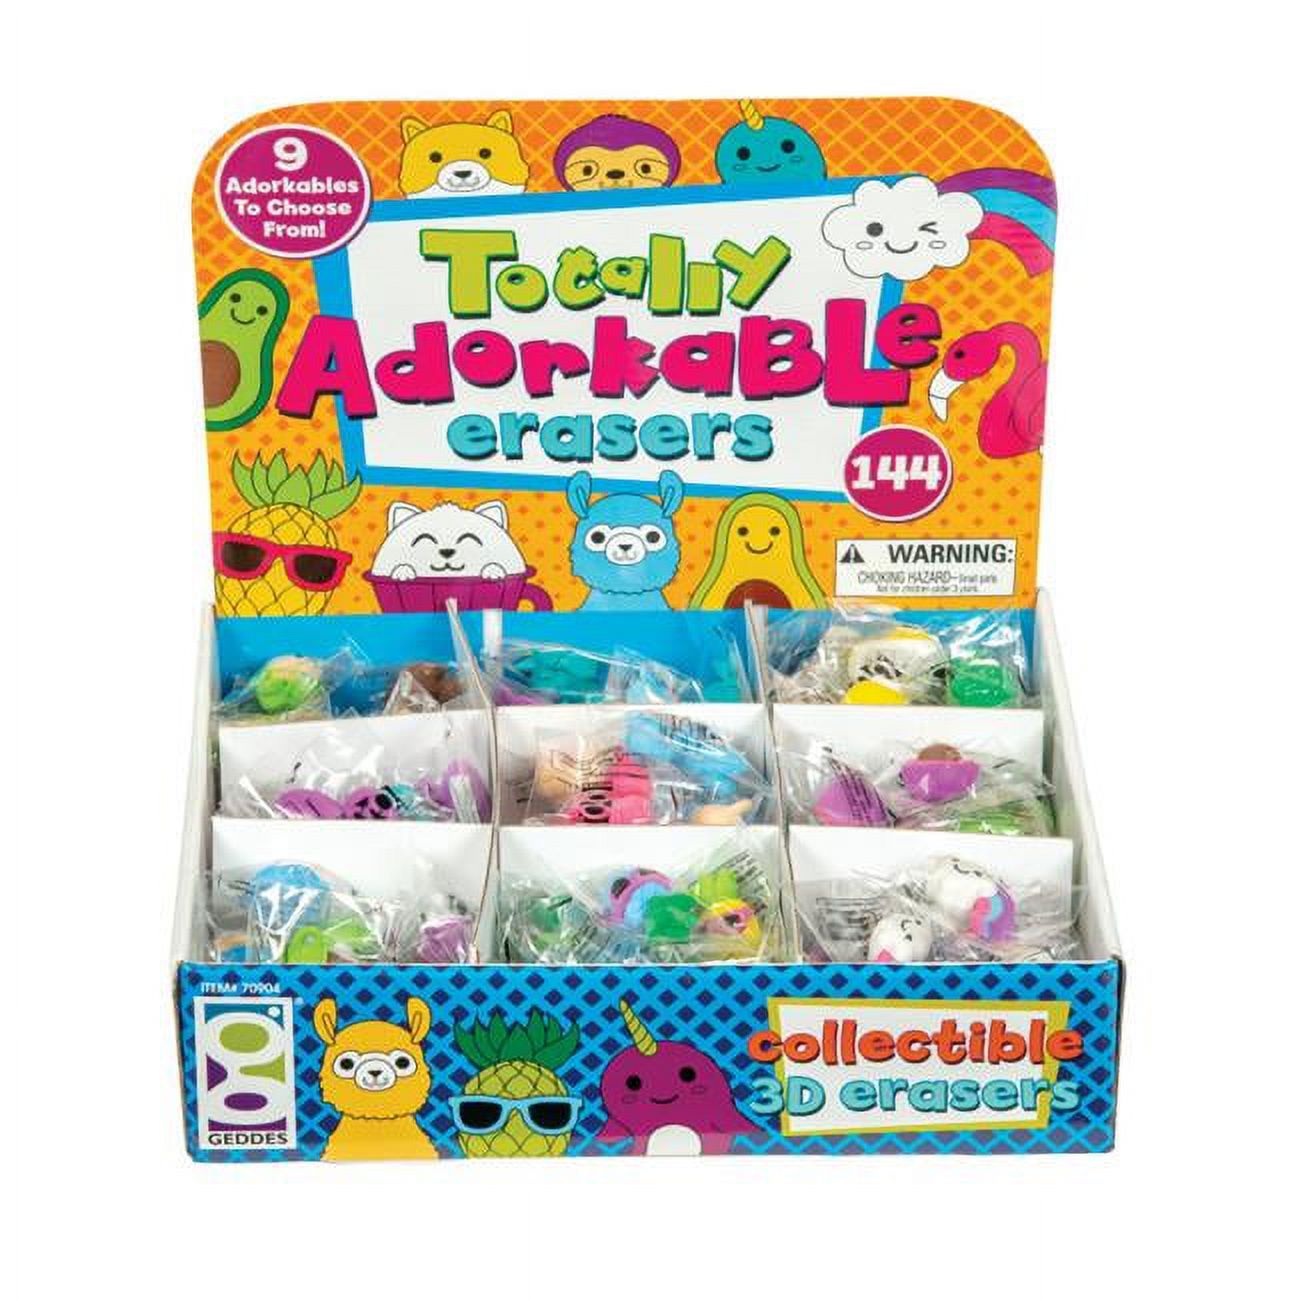 Picture of DDI 2339321 Geddes Totally Adorkable Erasers- 144 Count  Single  Individually Wrapped  Display included Case of 144